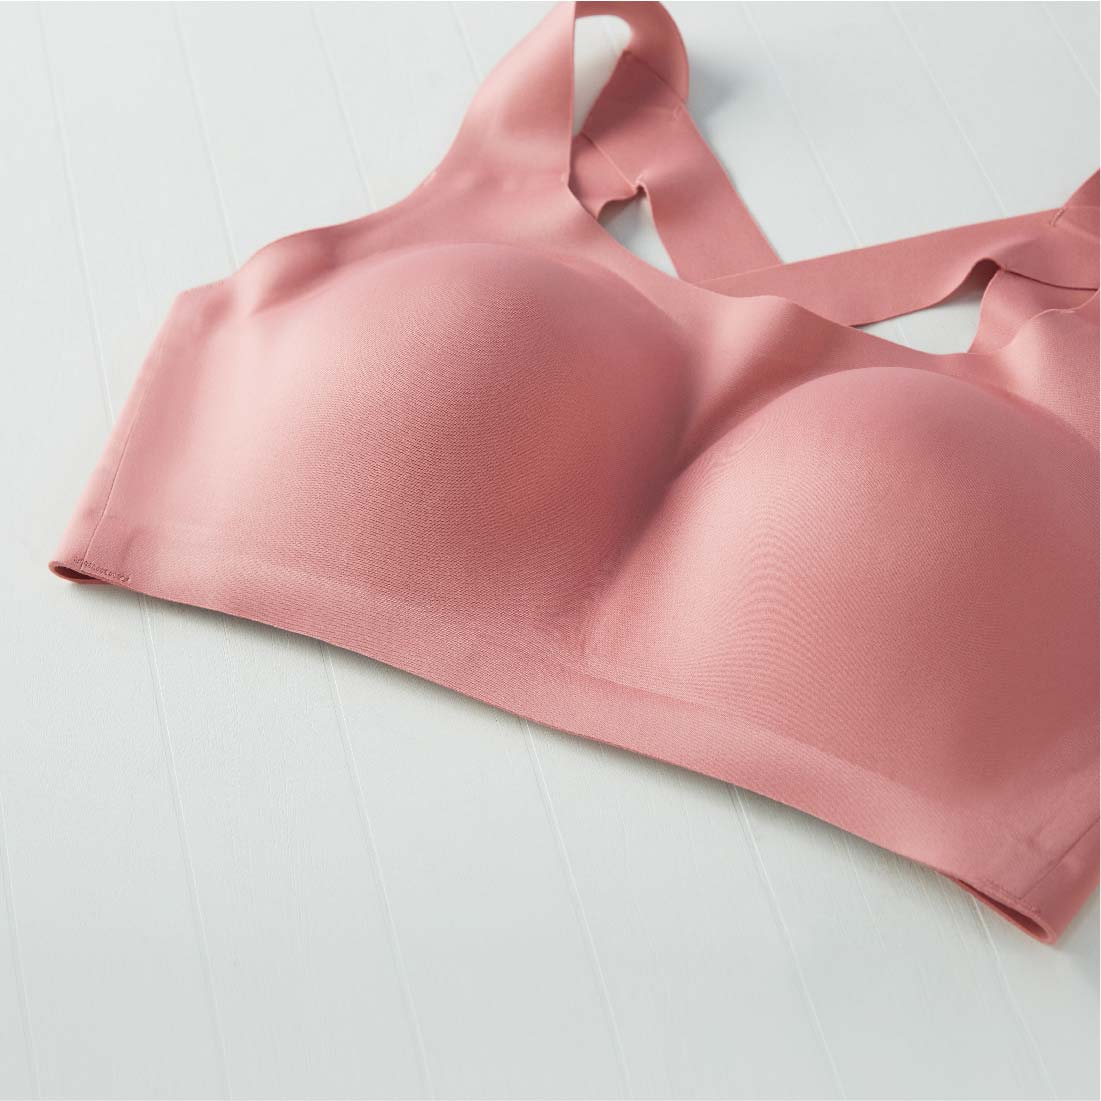 How to Choose a Sports Bra for Heavy Breasts? – Kica Active